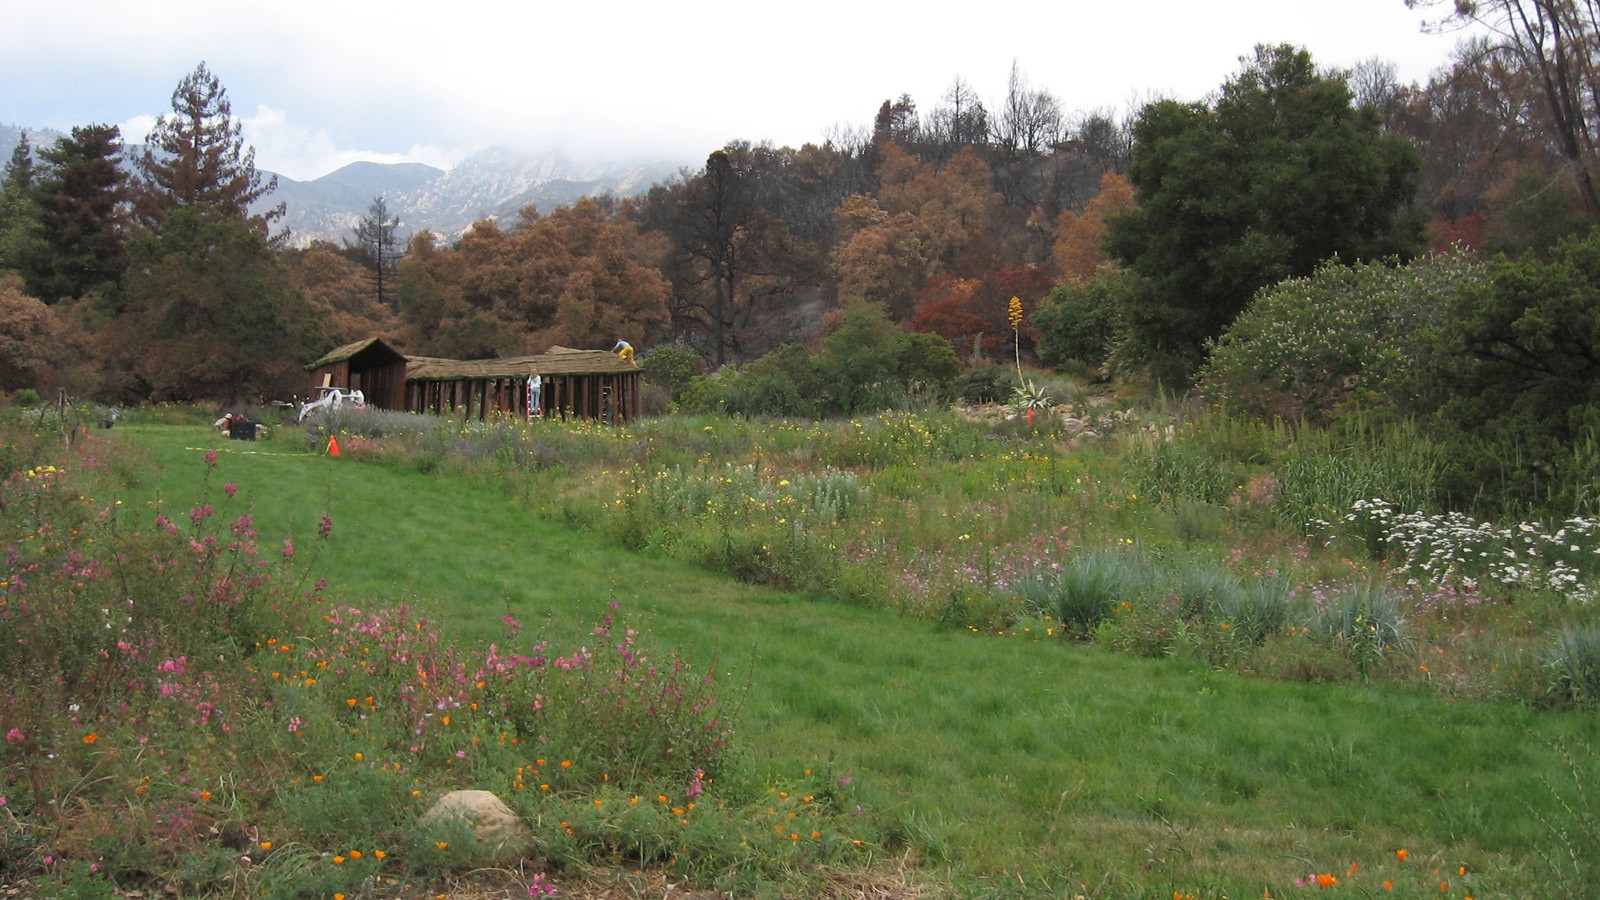 Photo showing the Meadow and damage from the May 2009 Jesusita Fire